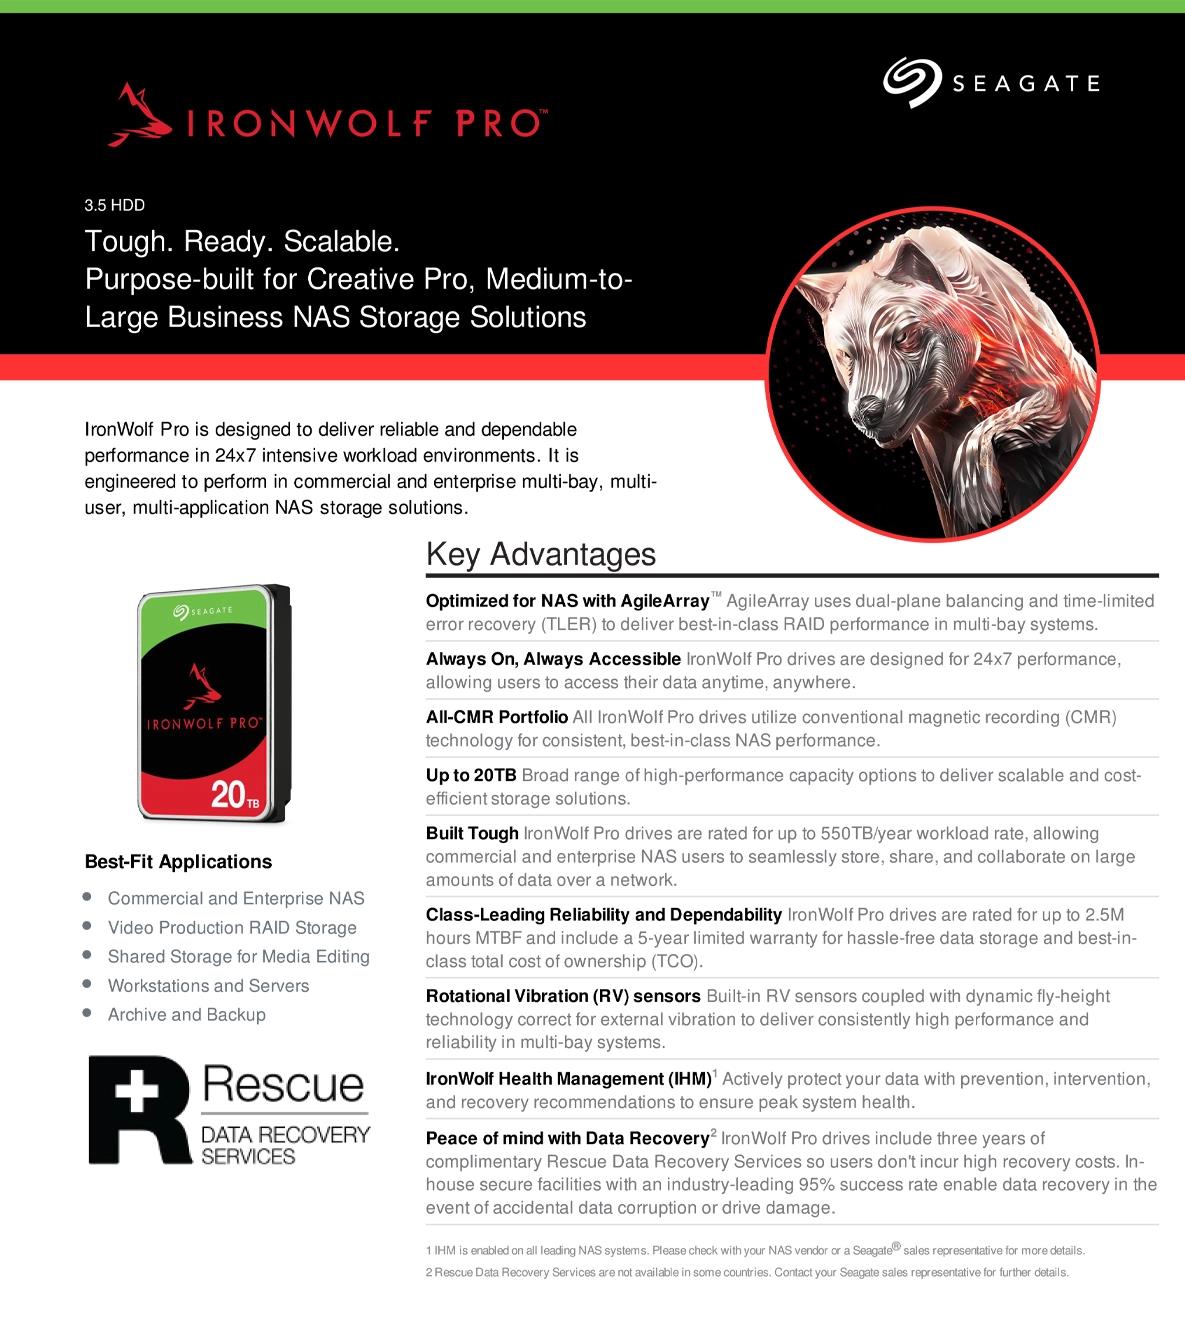 A large marketing image providing additional information about the product Seagate IronWolf Pro 3.5" NAS HDD - 18TB 256MB - Additional alt info not provided